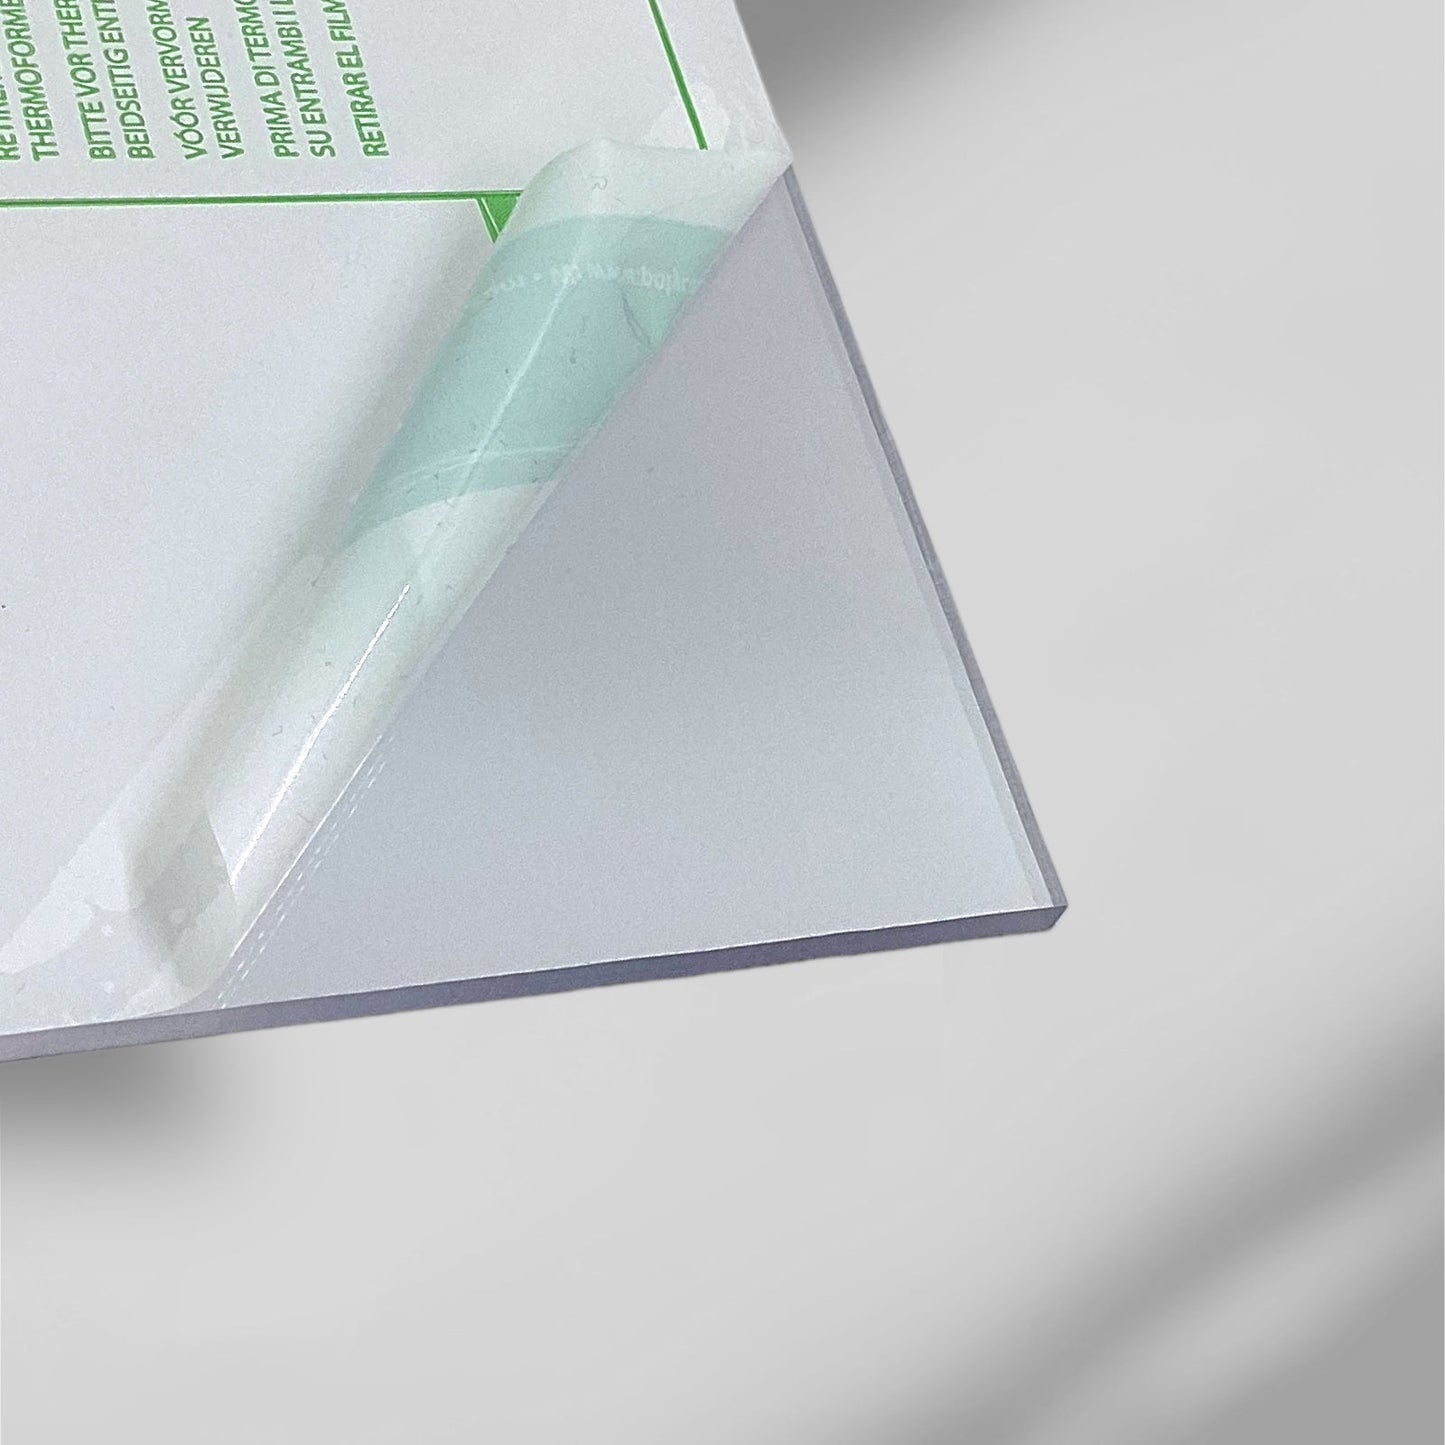 1/4" Clear Polycarbonate Sheet